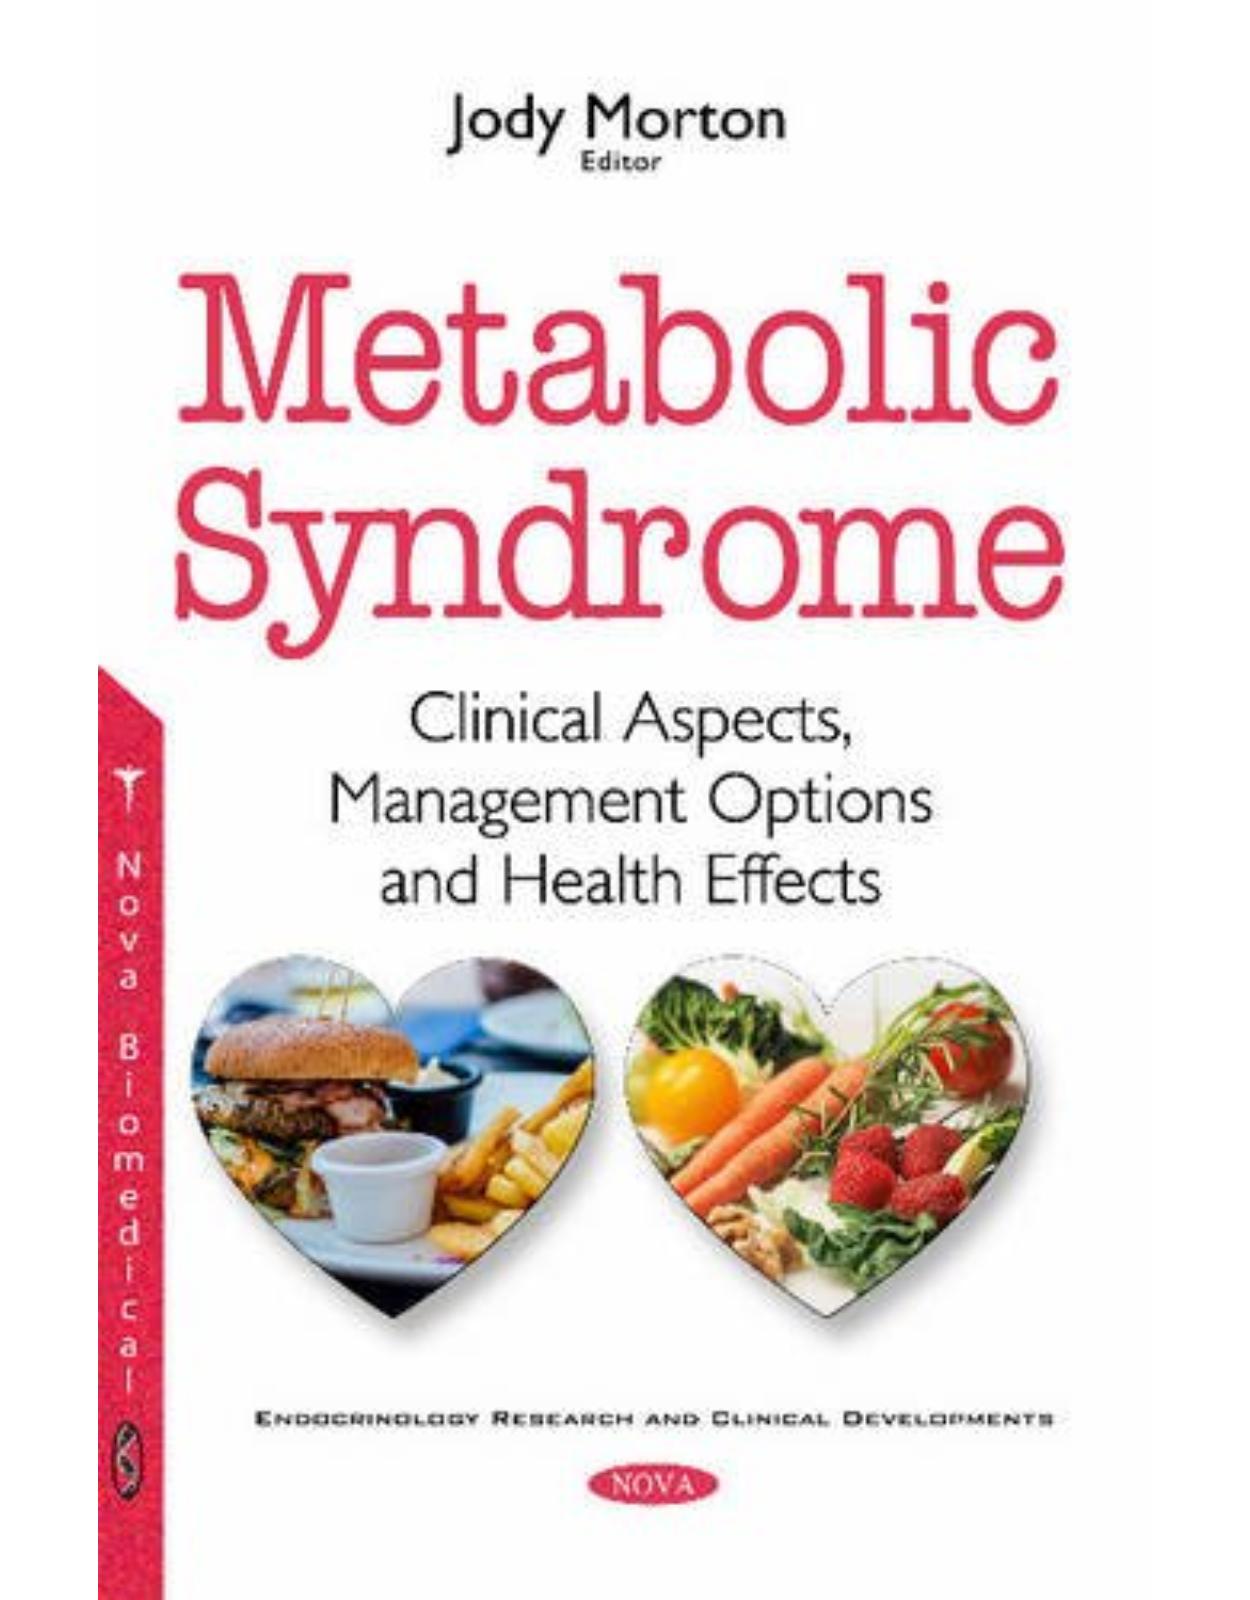 Metabolic Syndrome: Clinical Aspects, Management Options & Health Effects